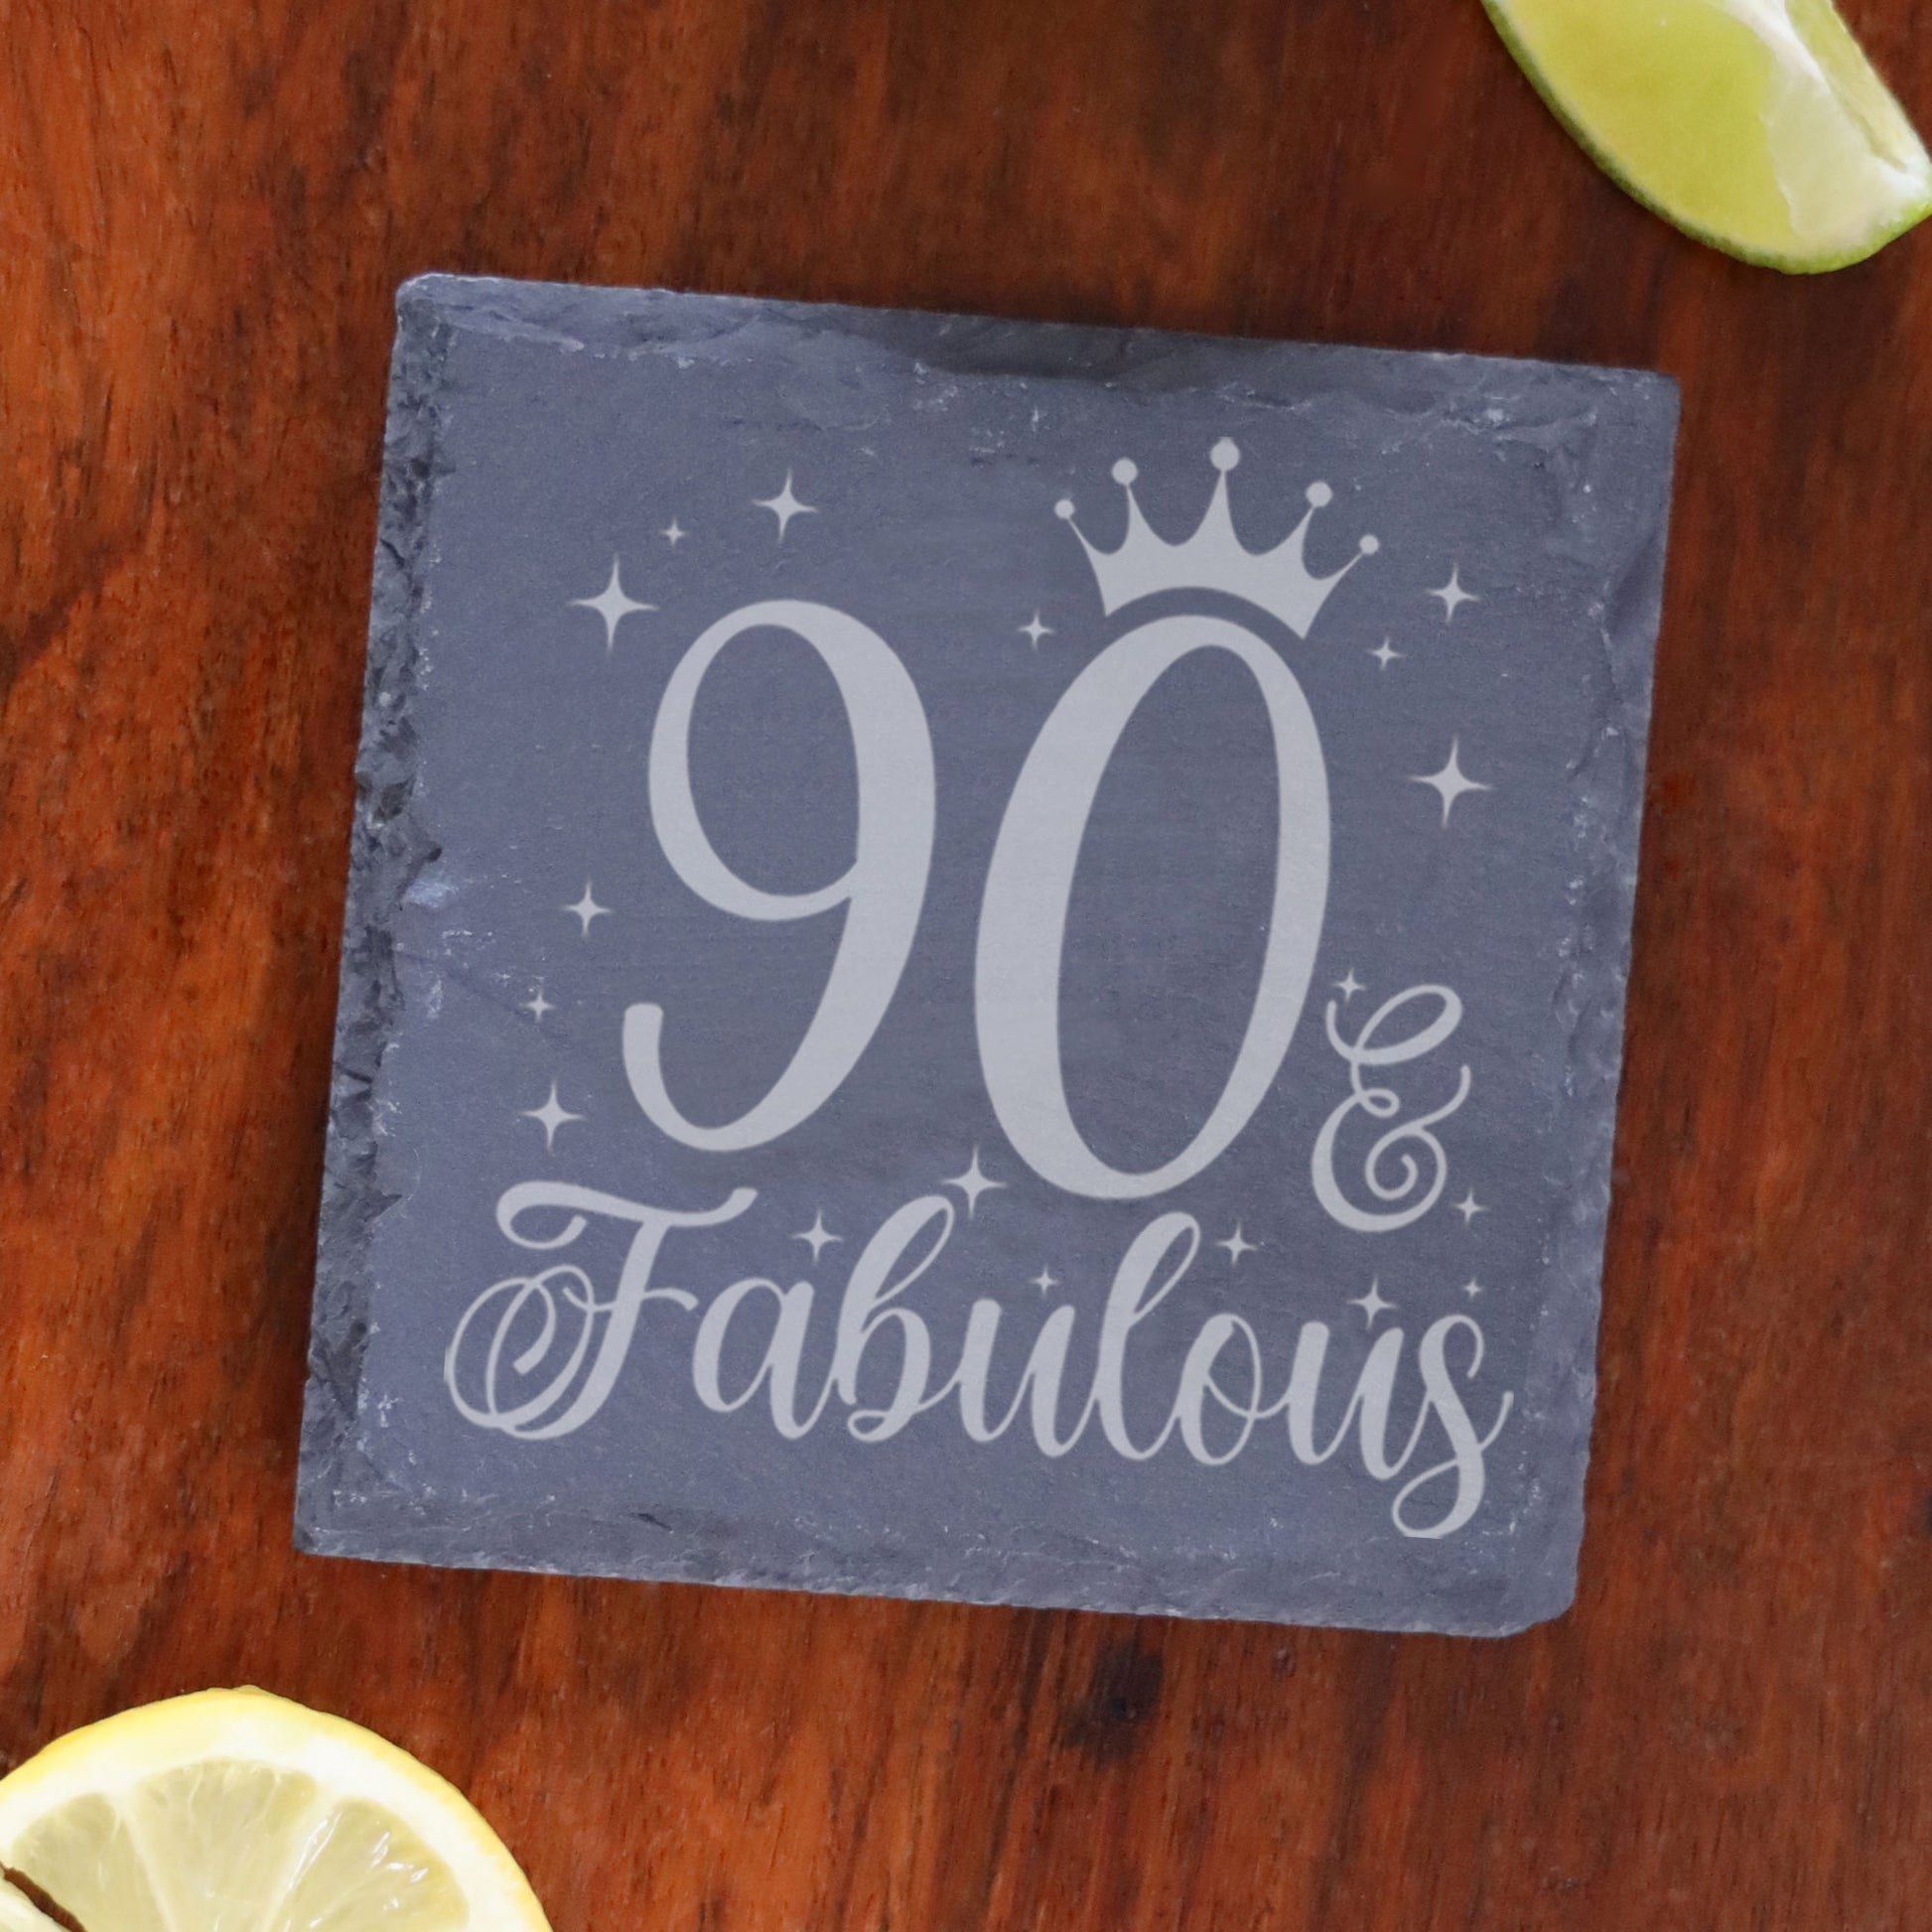 90 & Fabulous 90th Birthday Gift Engraved Wine Glass and/or Coaster Set  - Always Looking Good - Square Coaster Only  